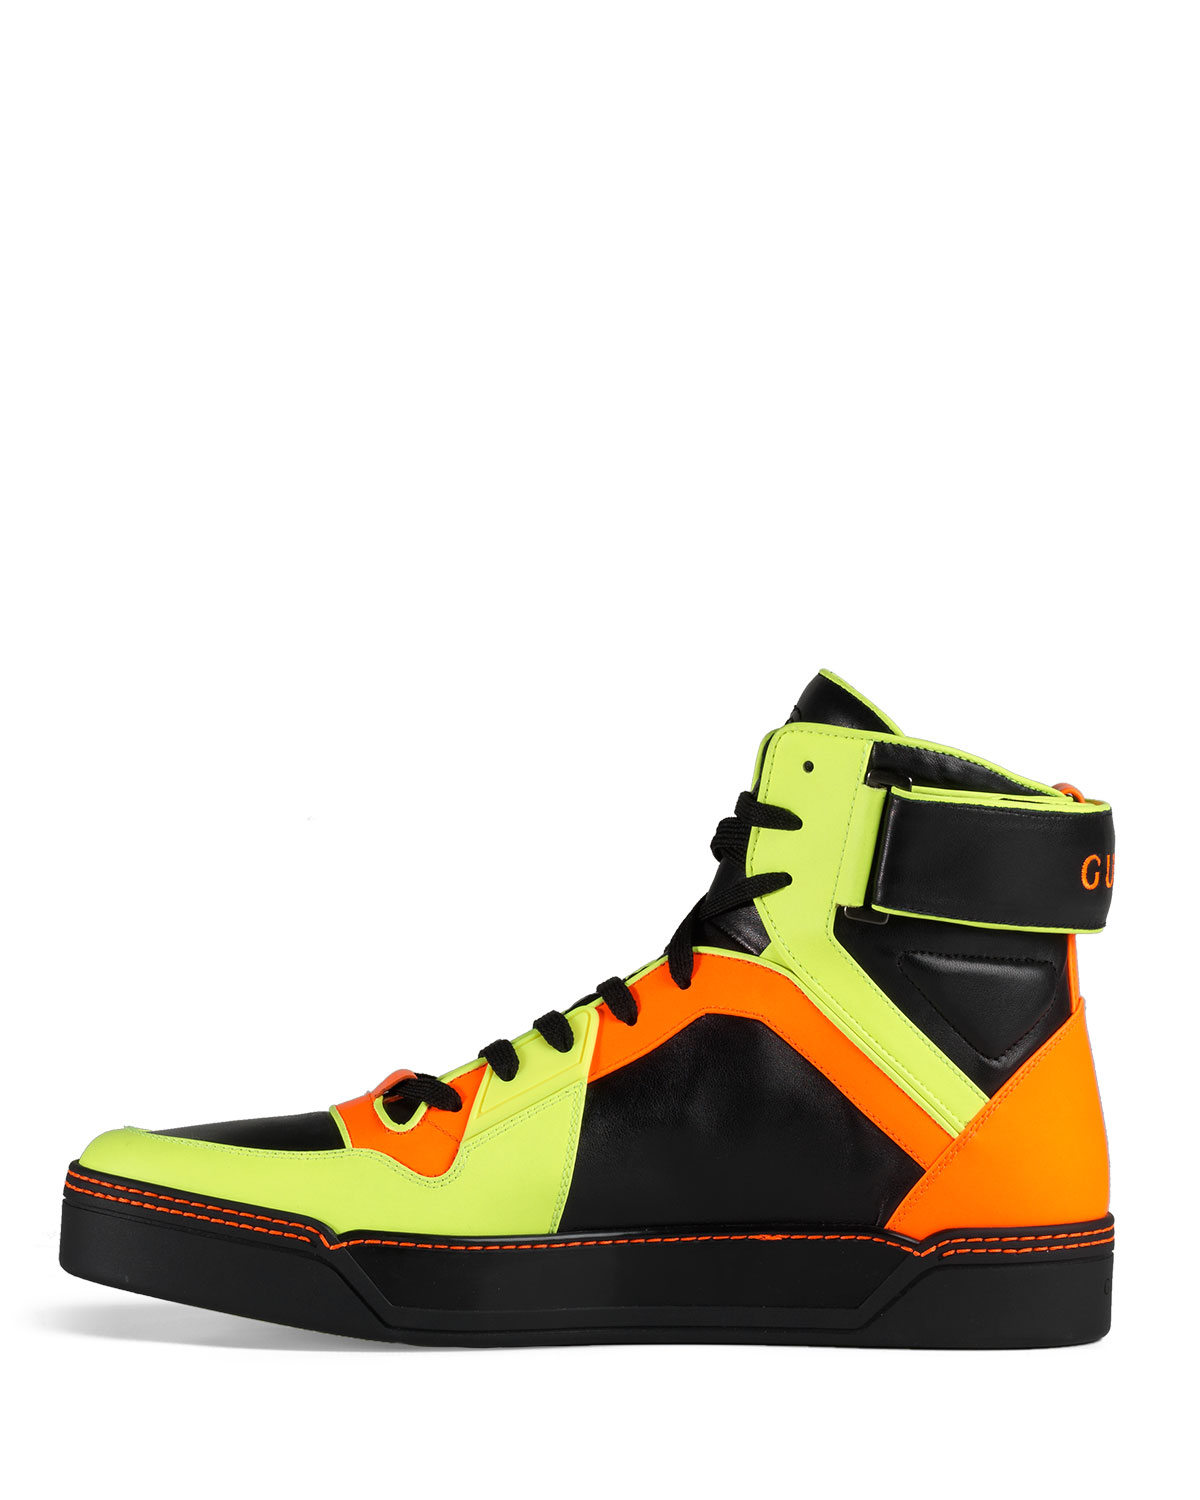 Lyst - Gucci New Basketball High-top in Black